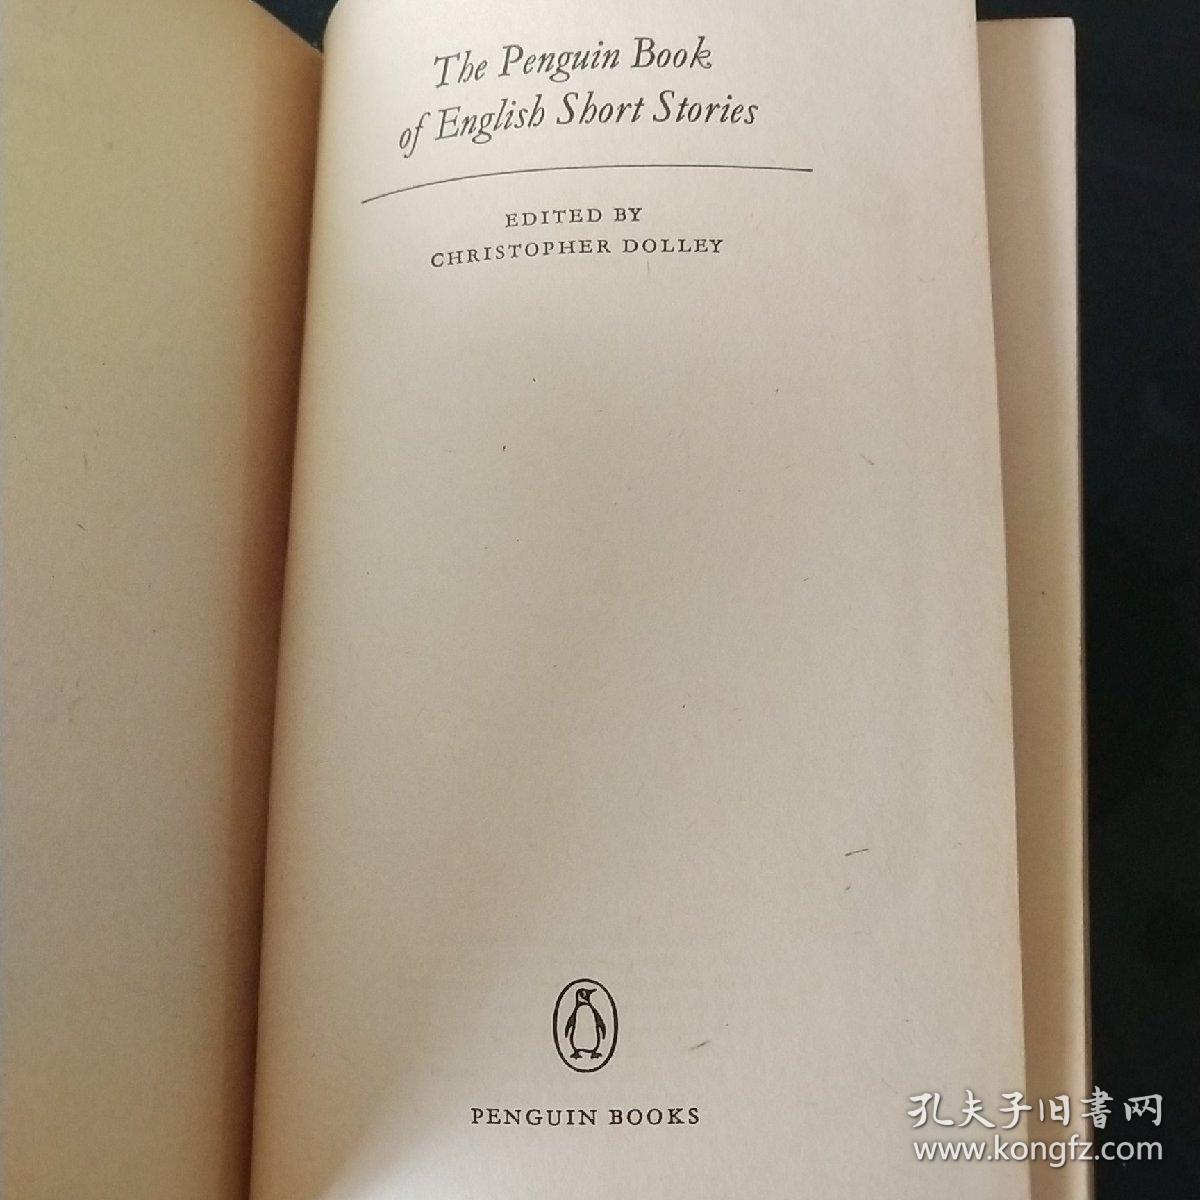 The penguin book of English short stories 【《英文短篇小说故事》】